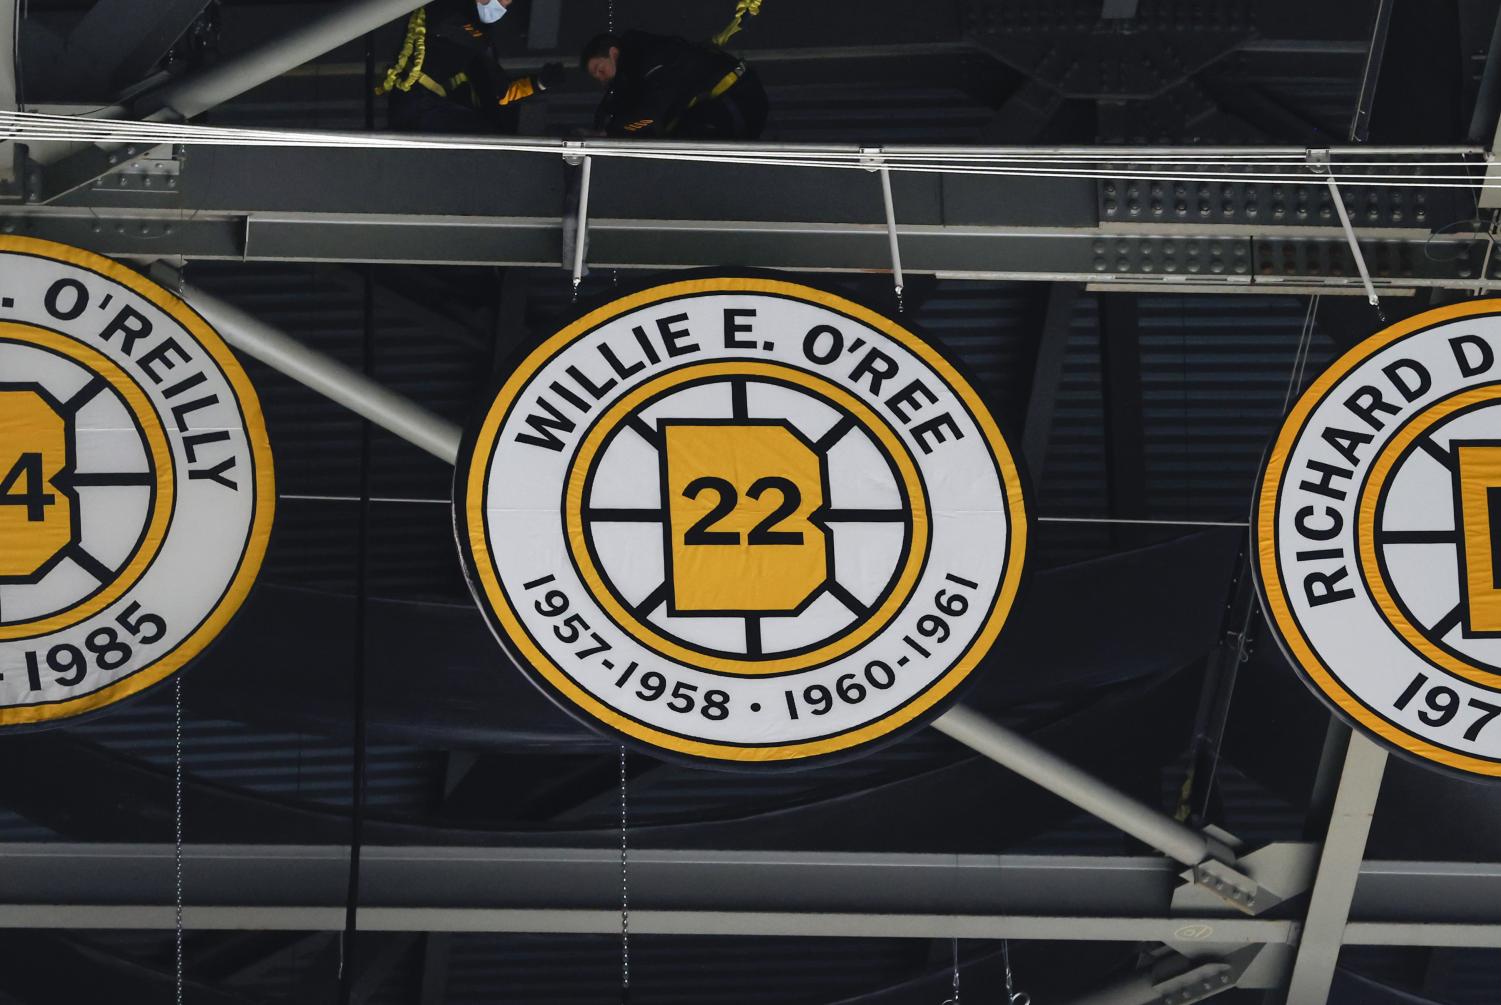 Boston Bruins retire jersey of Willie O'Ree, NHL's first black player